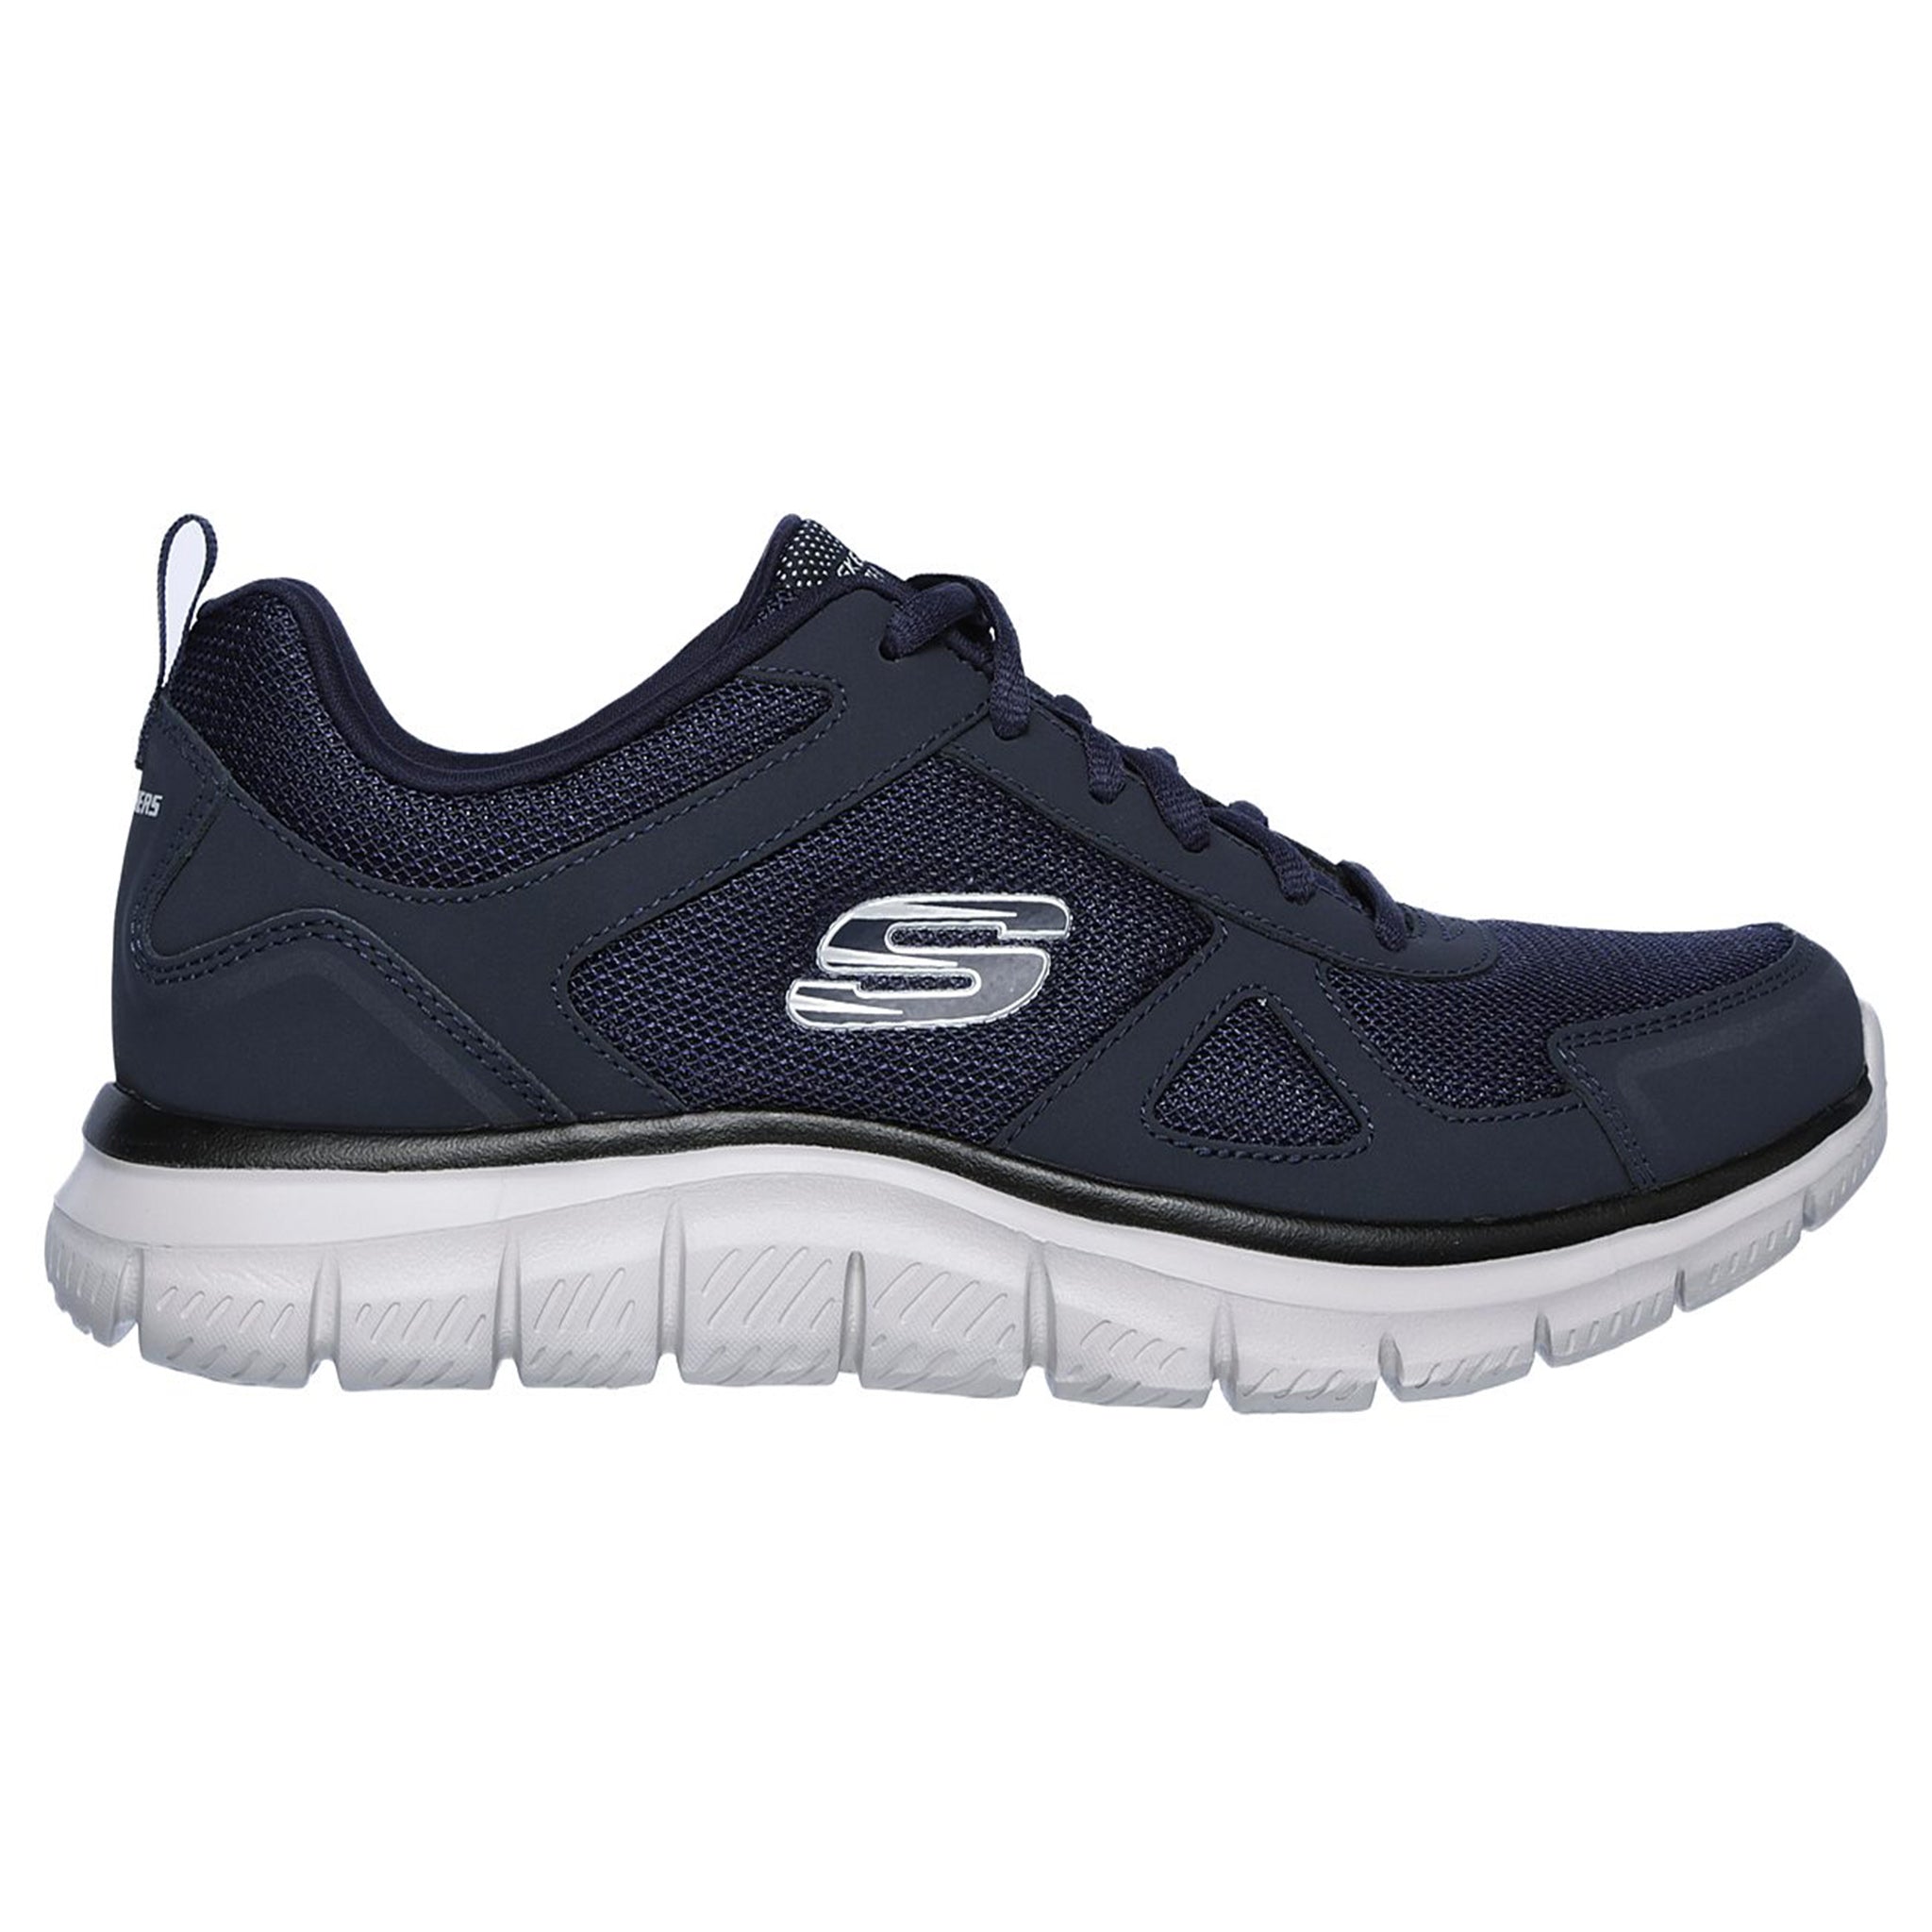 Skechers Mens 52631 Track Scloric Sport Athletic Shoes – That Shoe and More